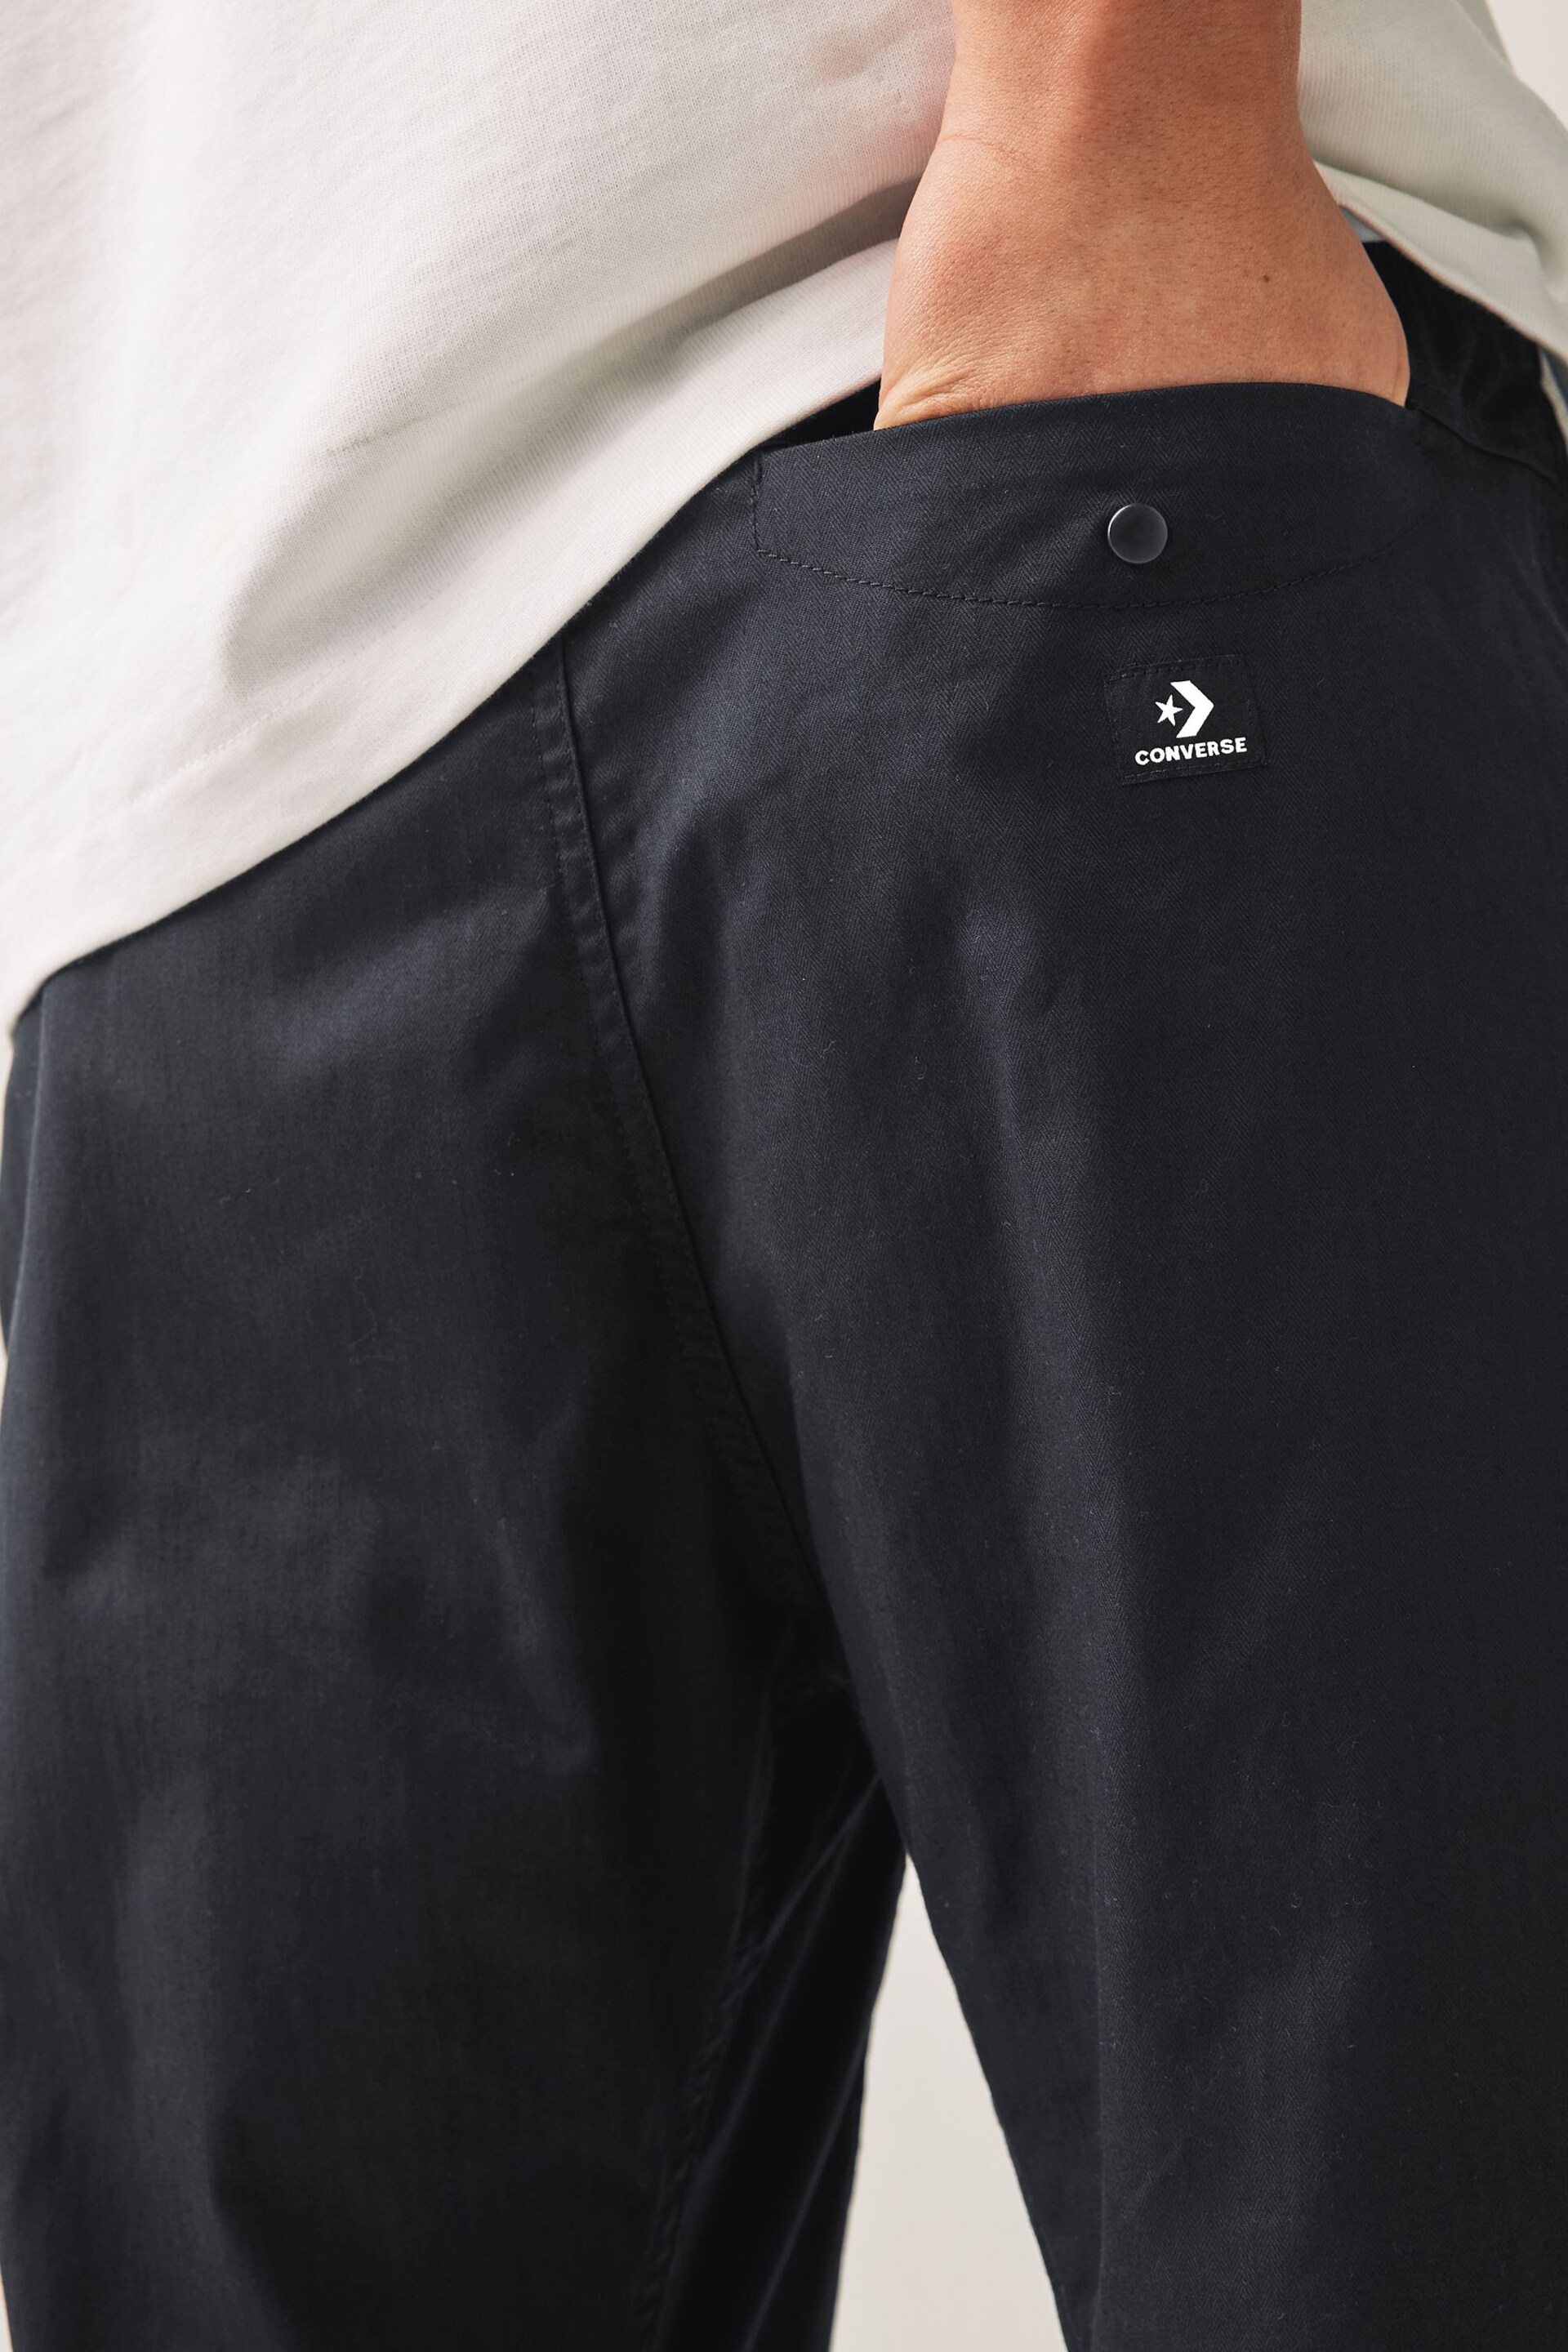 Converse Black Elevated Woven Adjustable Trousers - Image 4 of 5